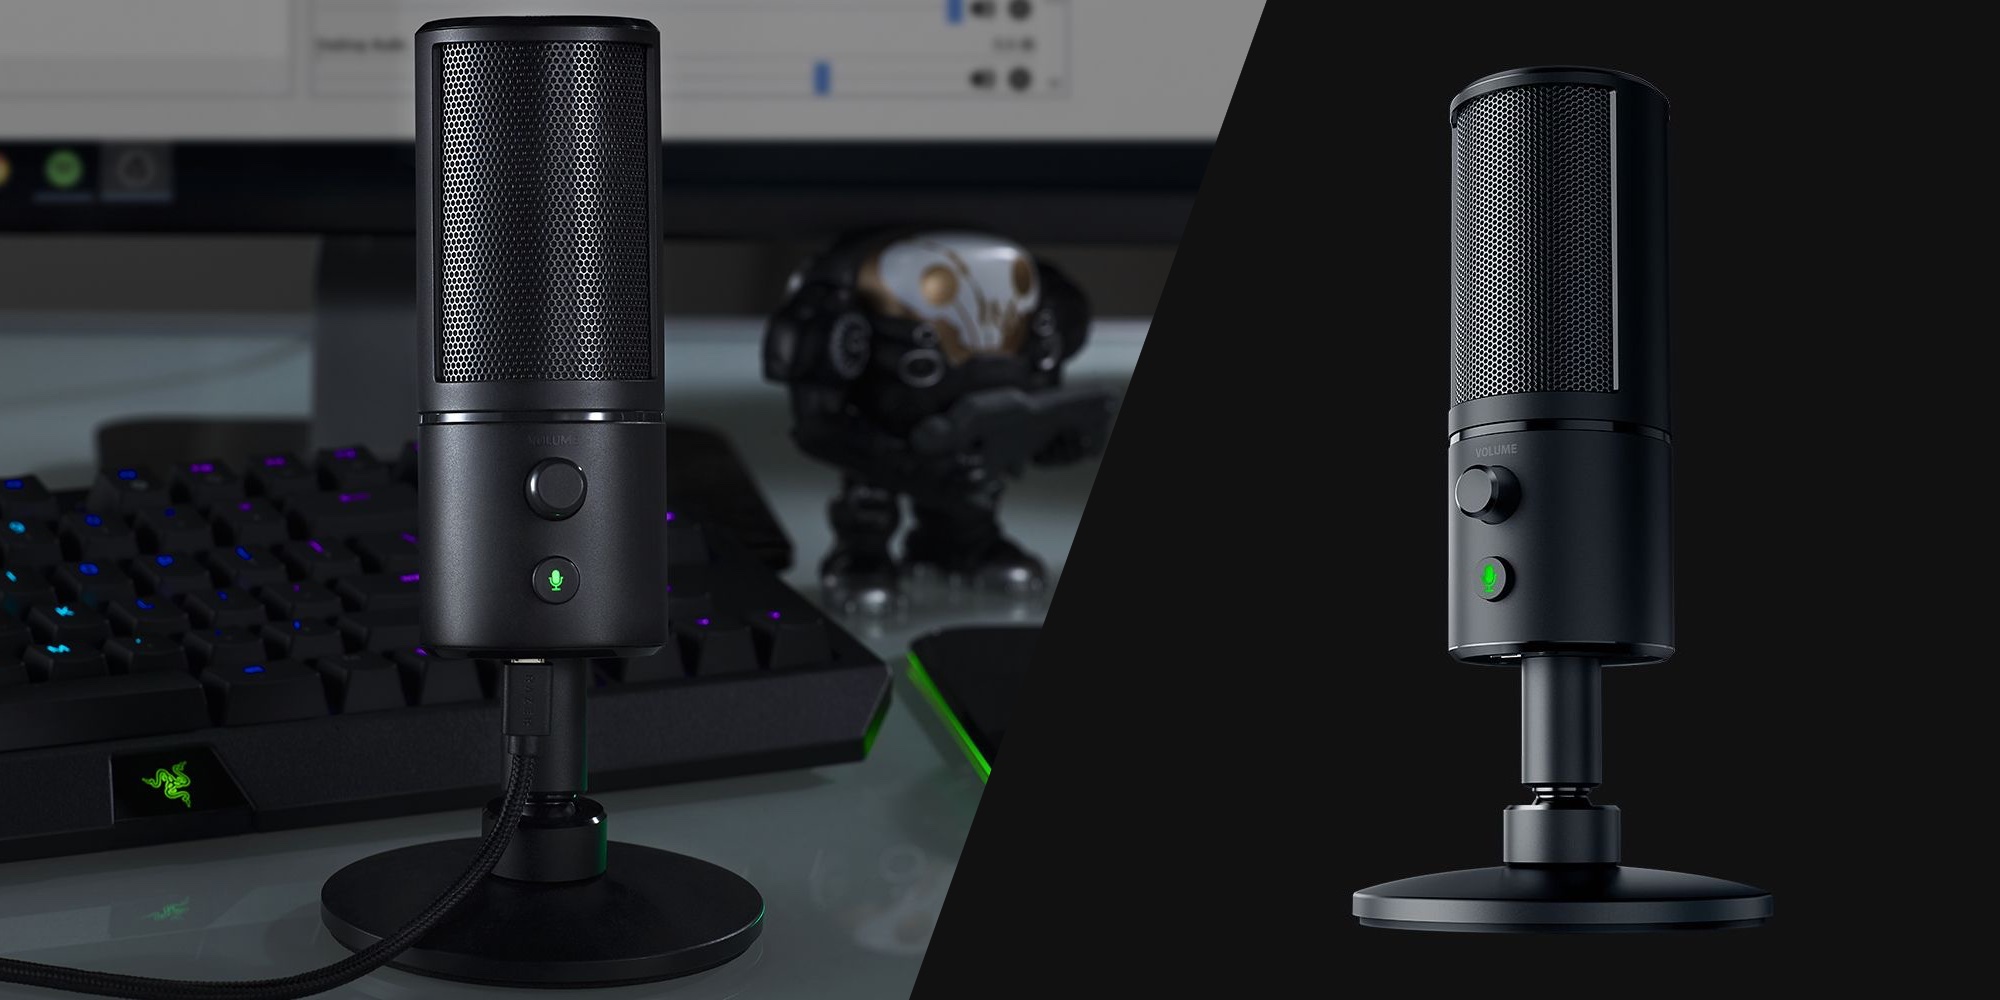 Add Razer S Seiren X Streaming Mic To Your Setup At A Low Of 67 21 Off 9to5toys